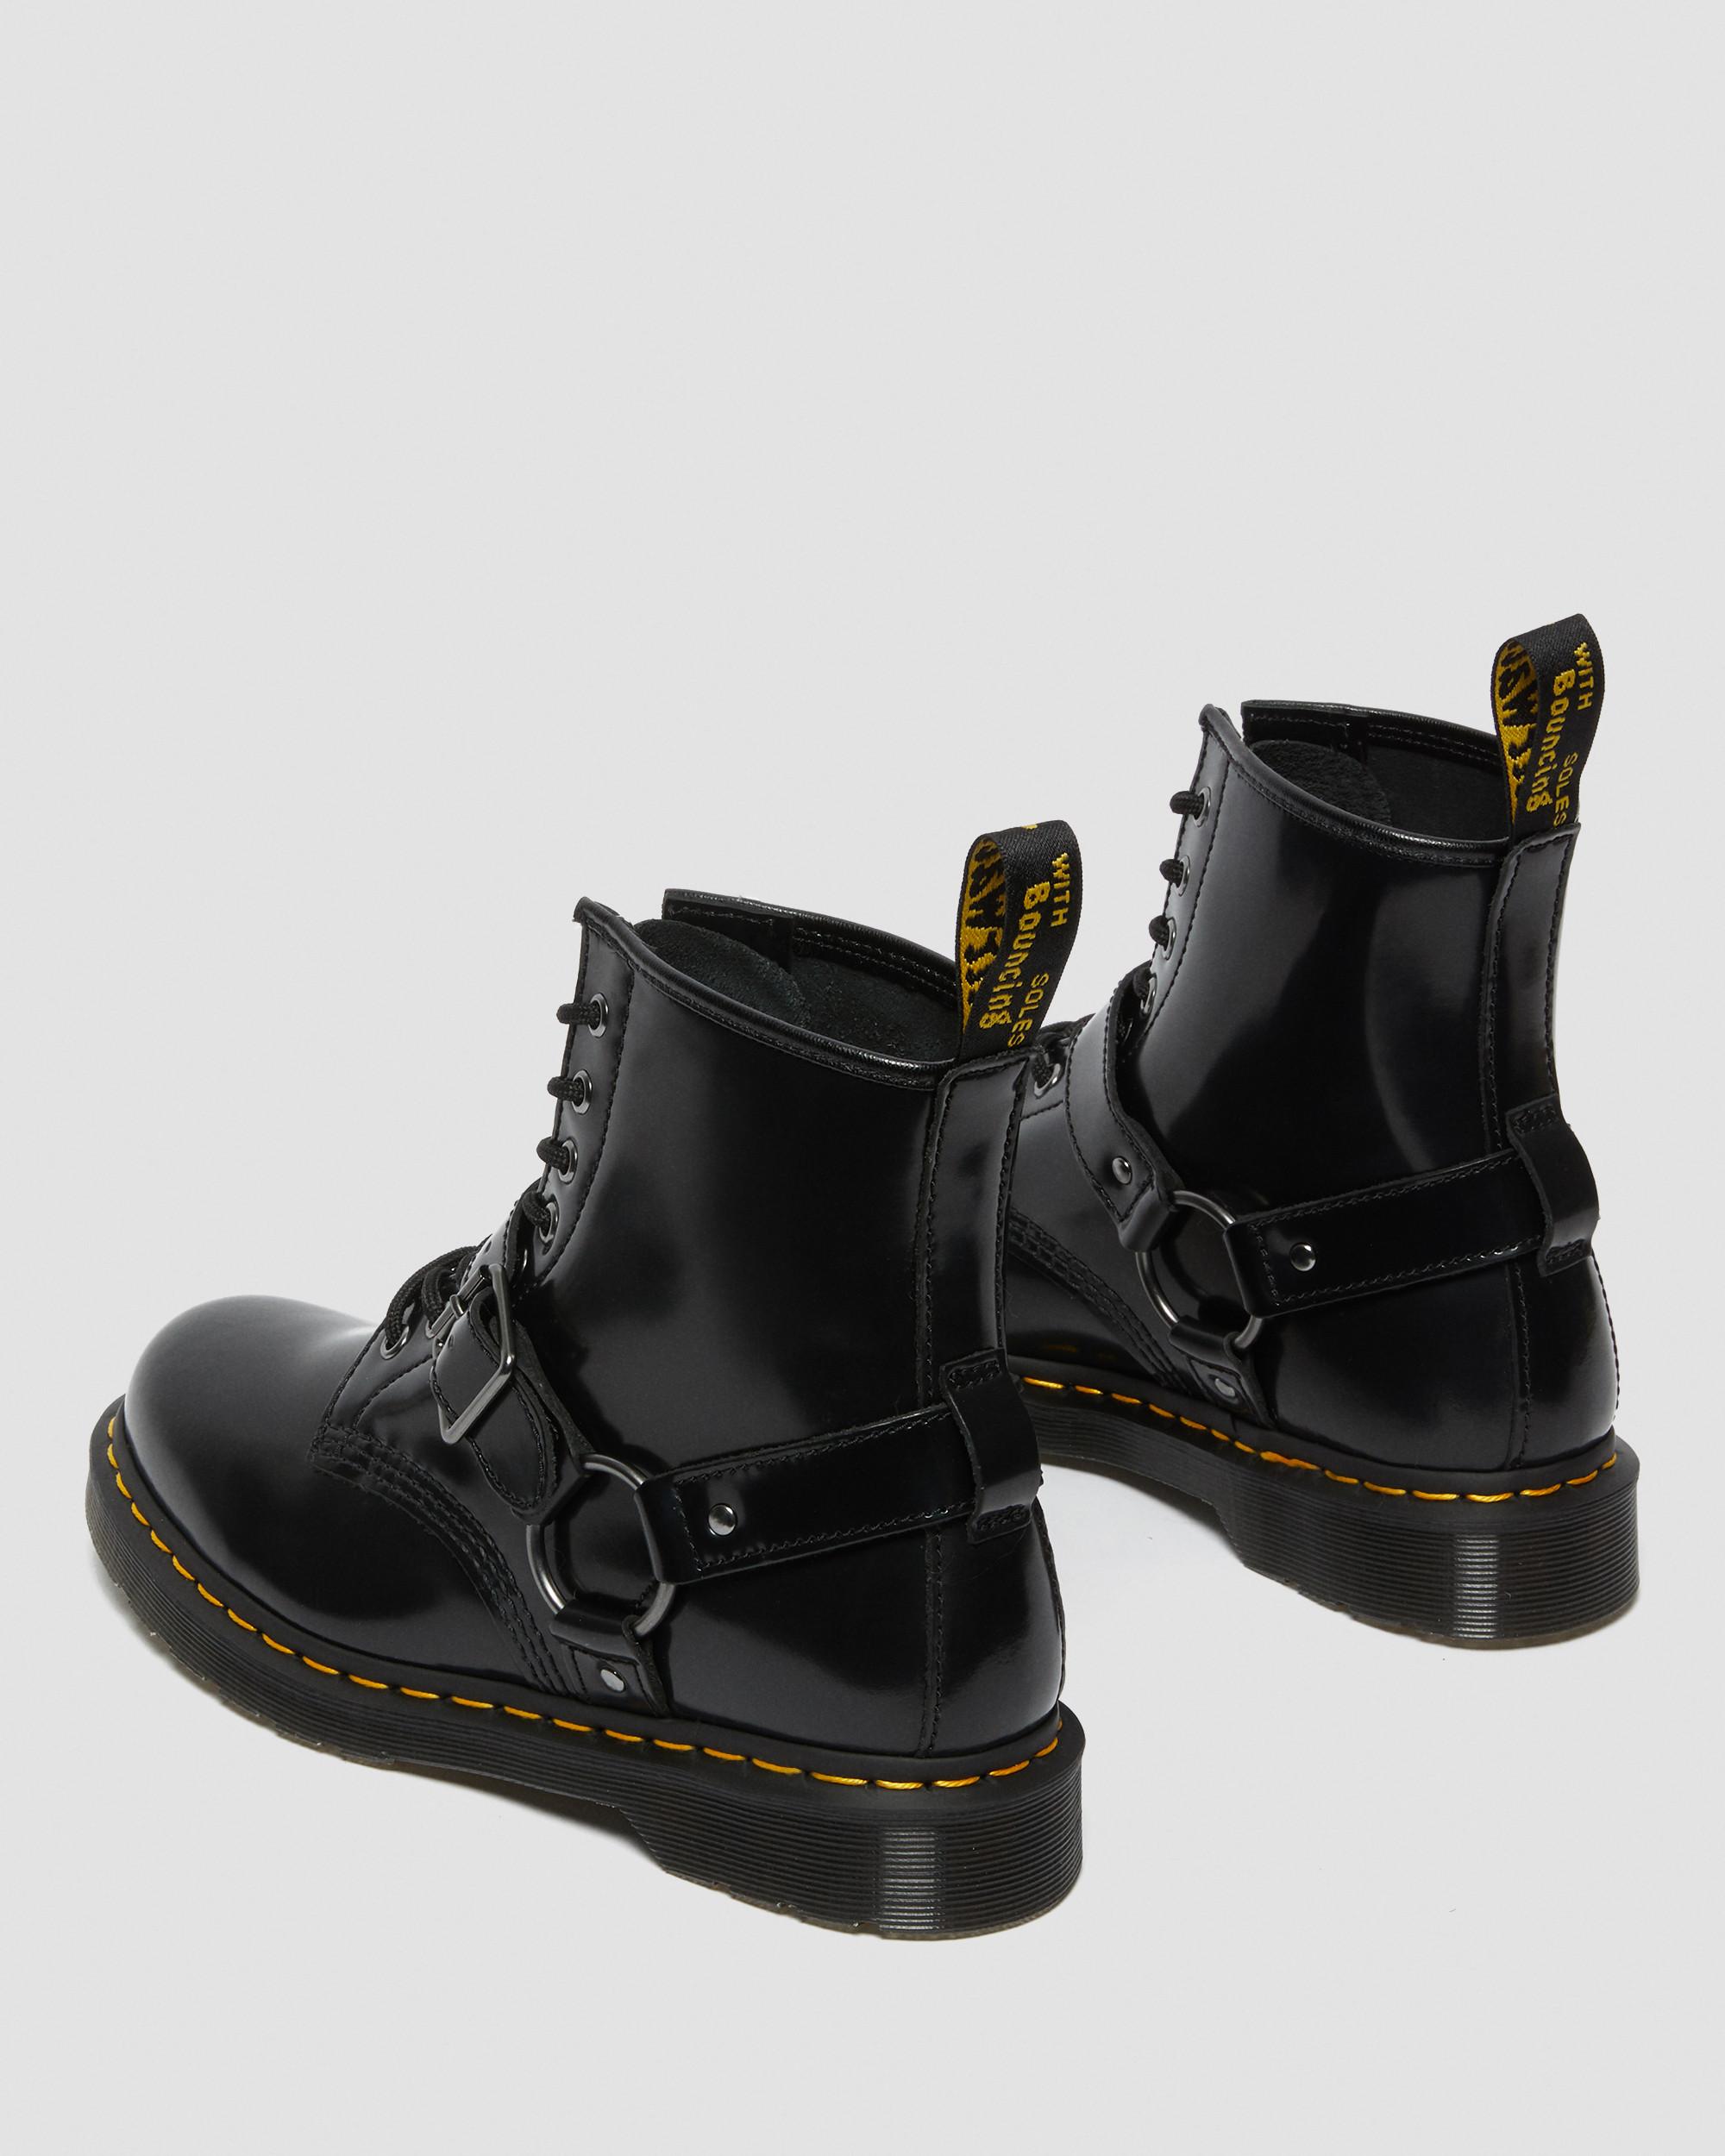 1460 Harness Leather Lace Up Boots, Black | Dr. Martens